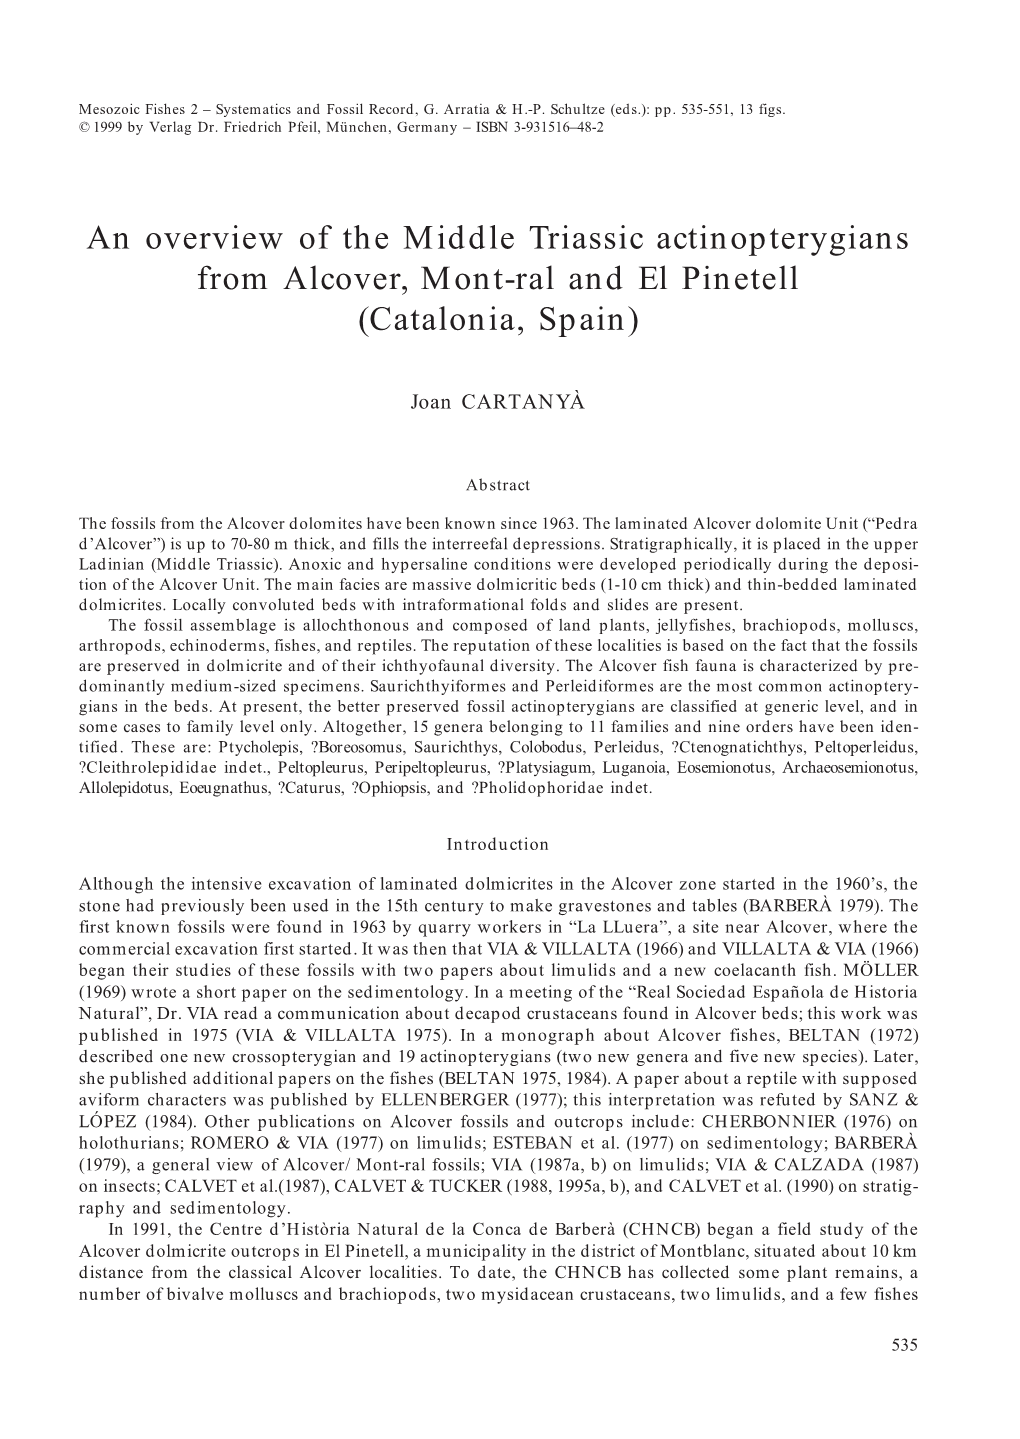 An Overview of the Middle Triassic Actinopterygians from Alcover, Mont-Ral and El Pinetell (Catalonia, Spain)